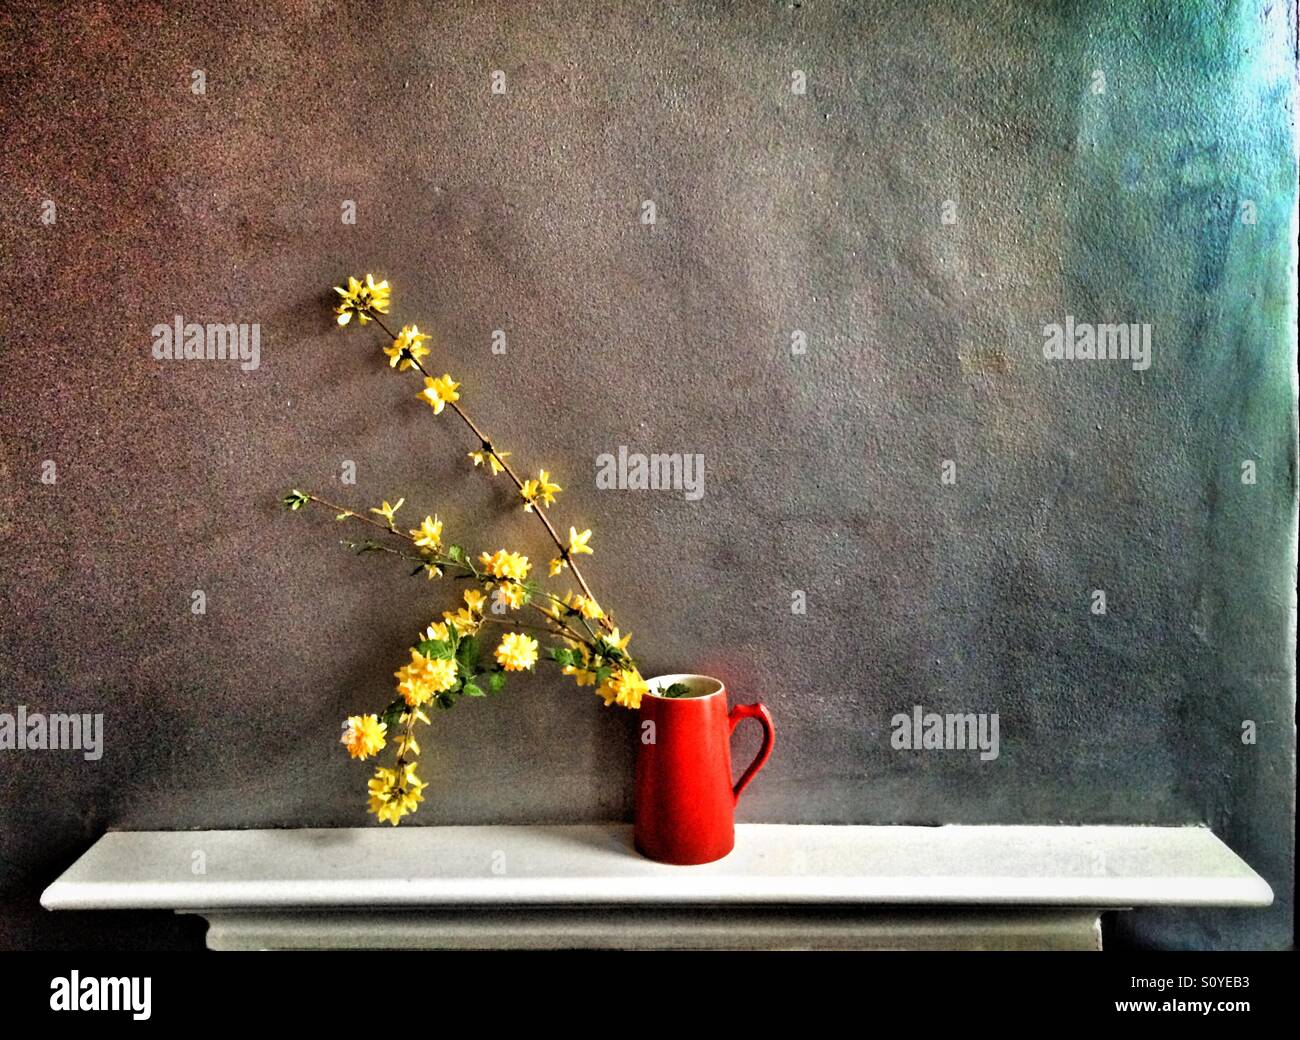 Yellow flowers in a jug on the mantelpiece Stock Photo